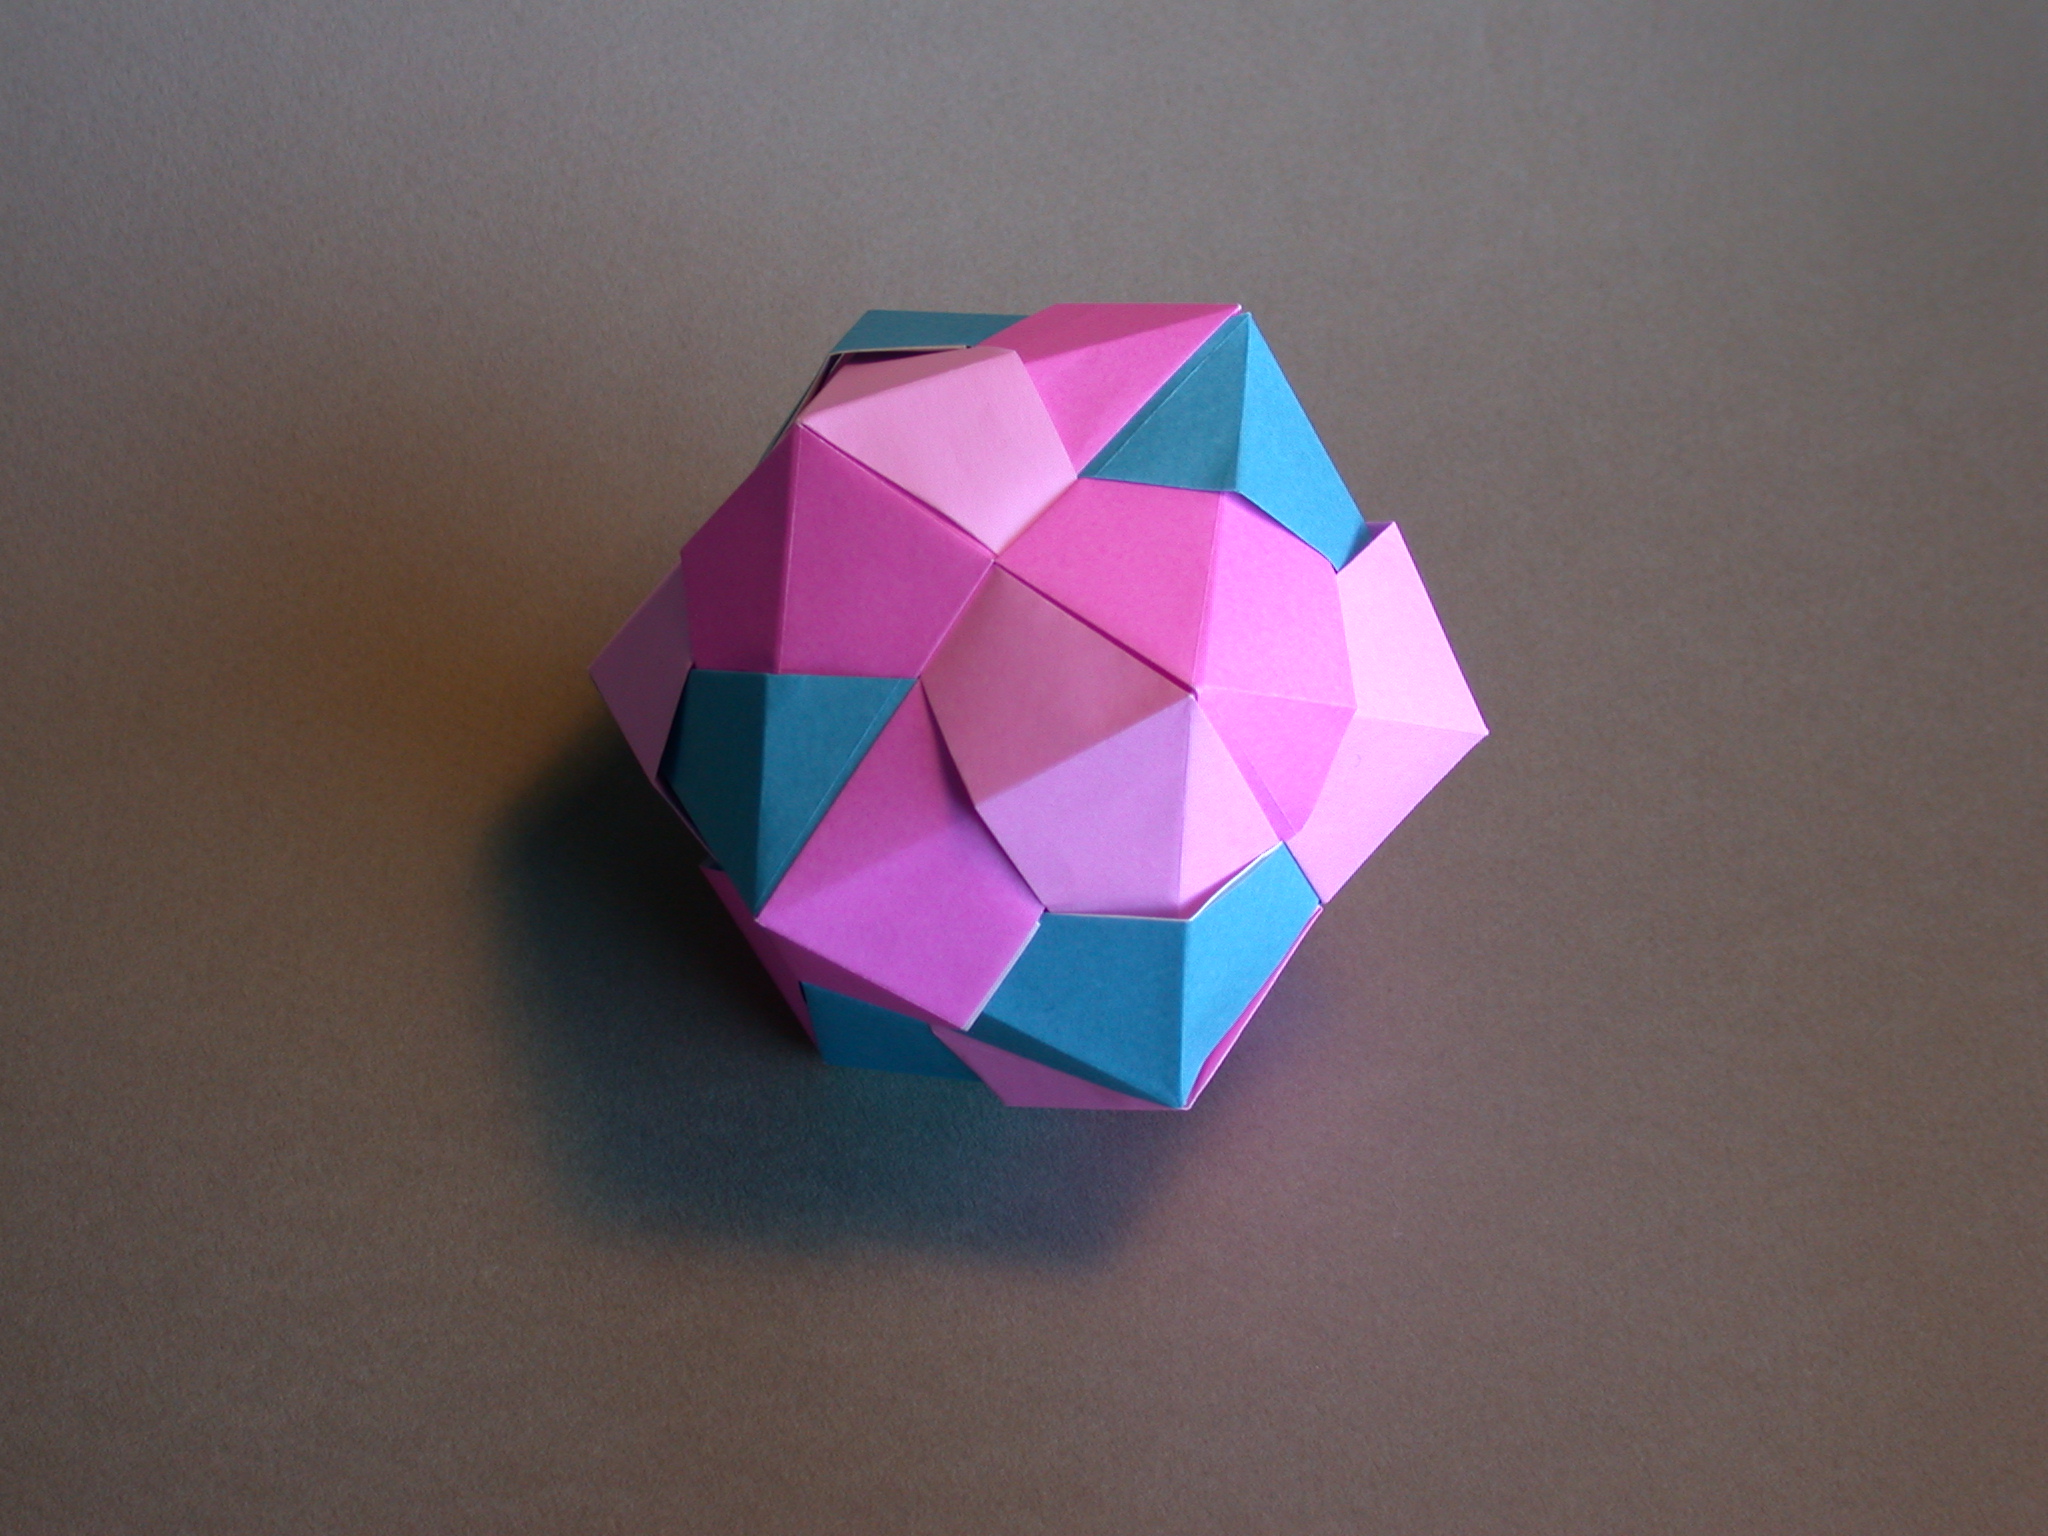 An icosahedron with 6 units